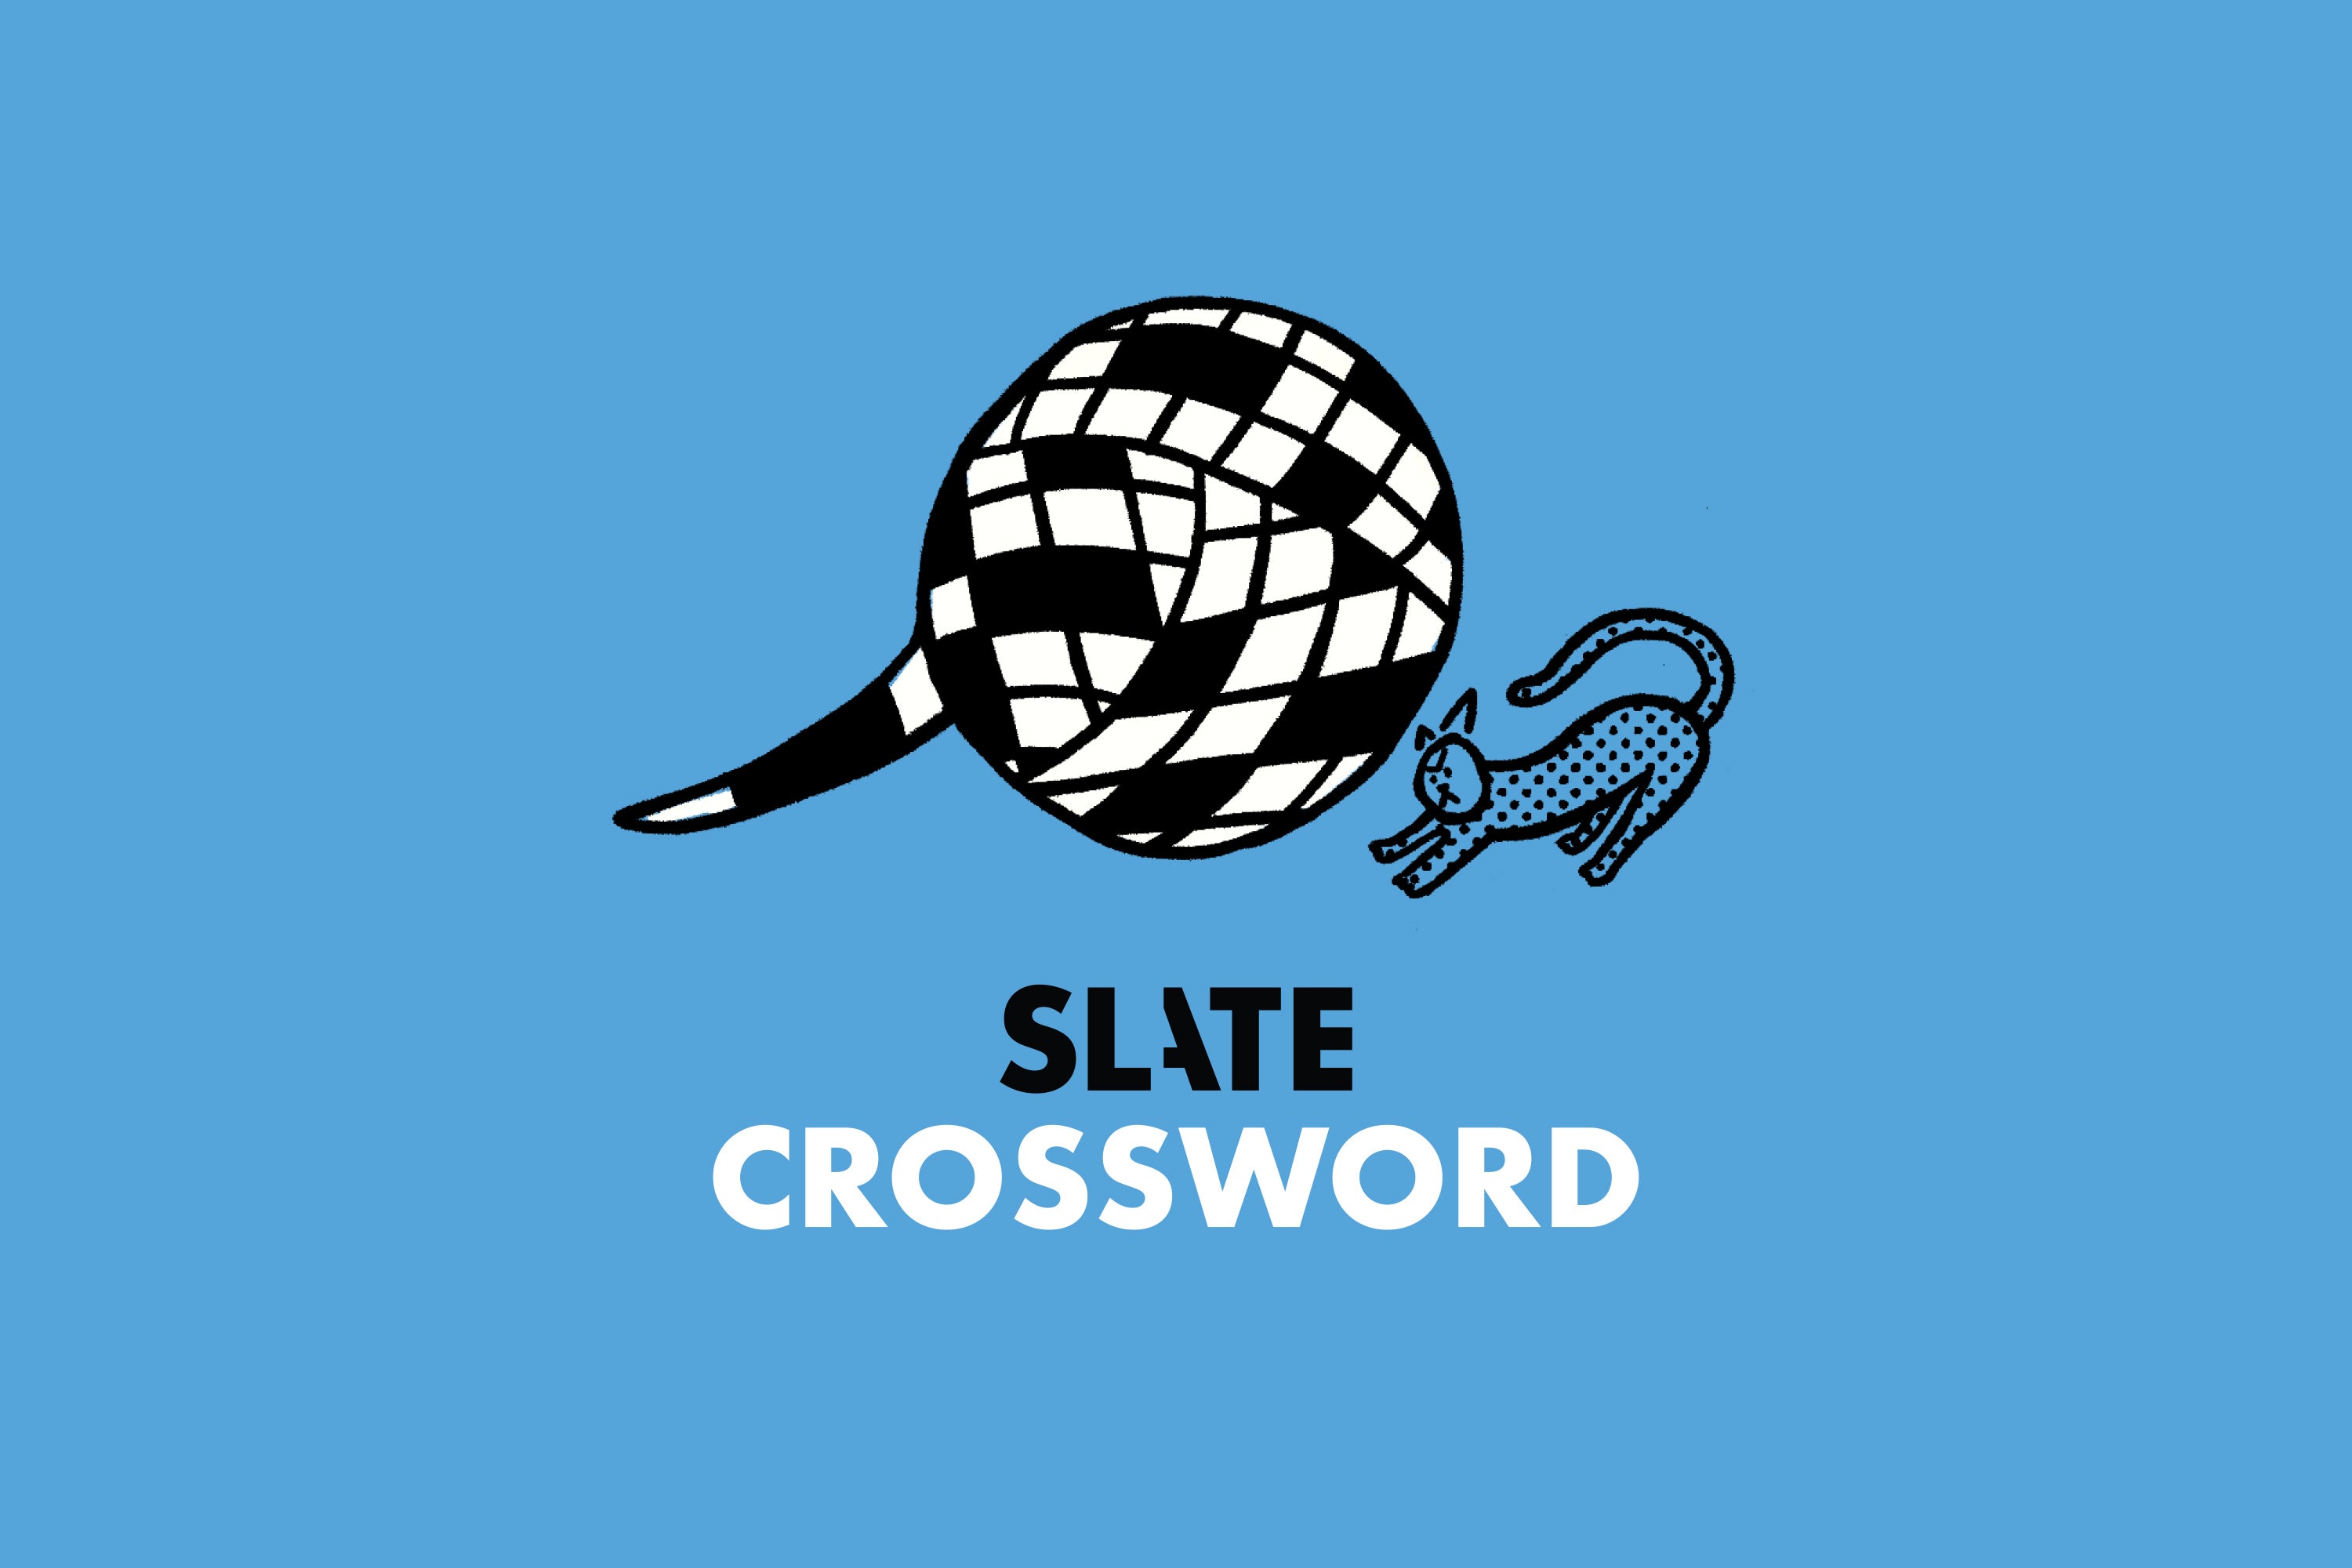 Slate Crossword: Naughty Verb for Austin Powers (Four Letters)